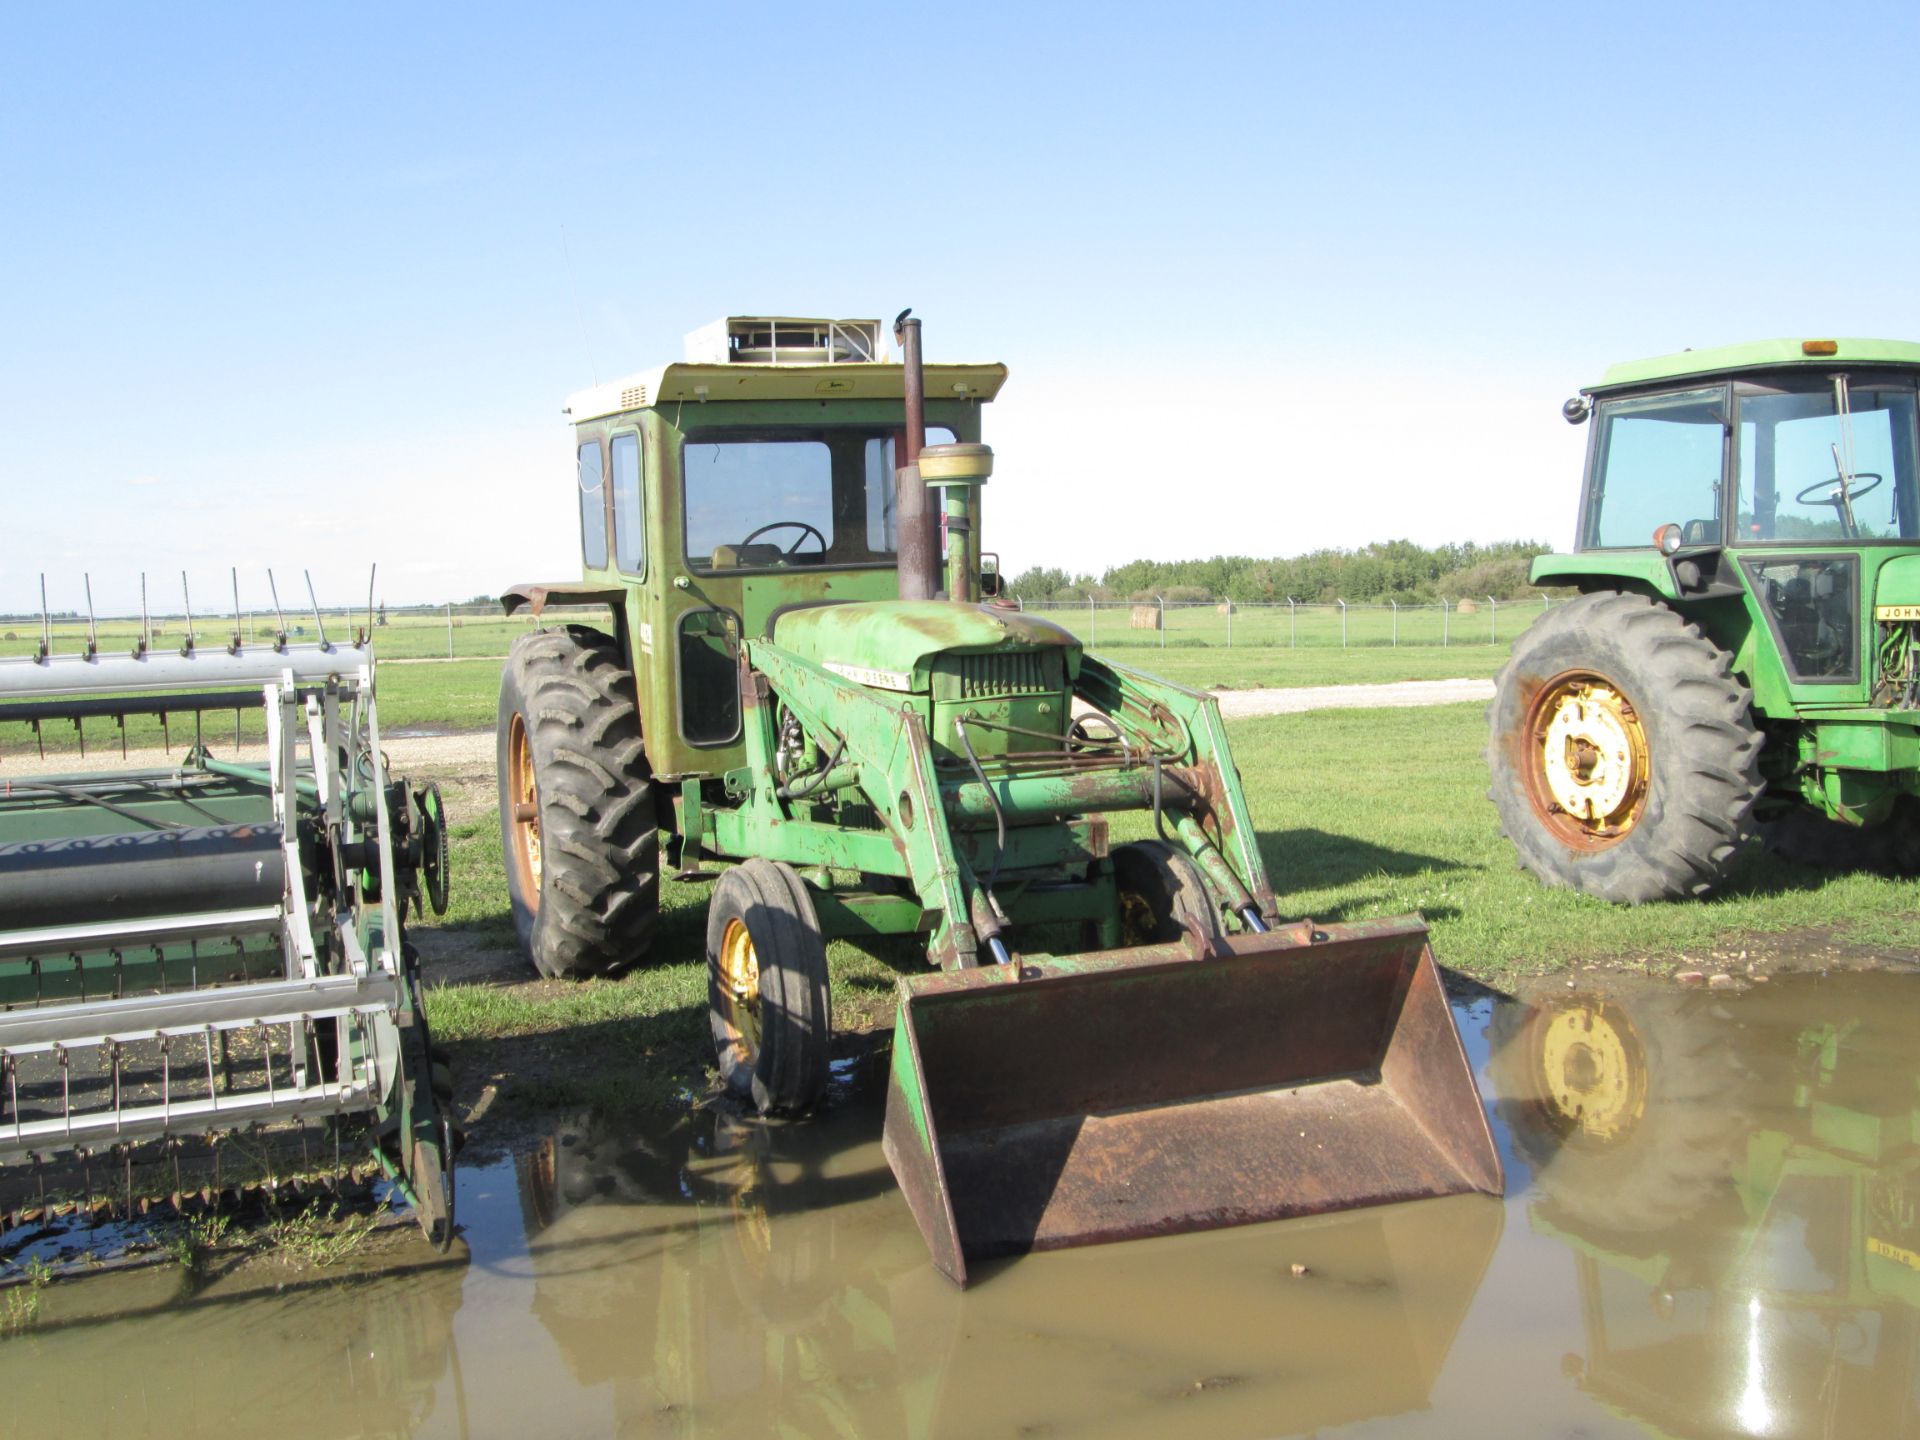 1964 JD 4020 TRACTOR C/W 46A LOADER & BUCKET - Image 2 of 3